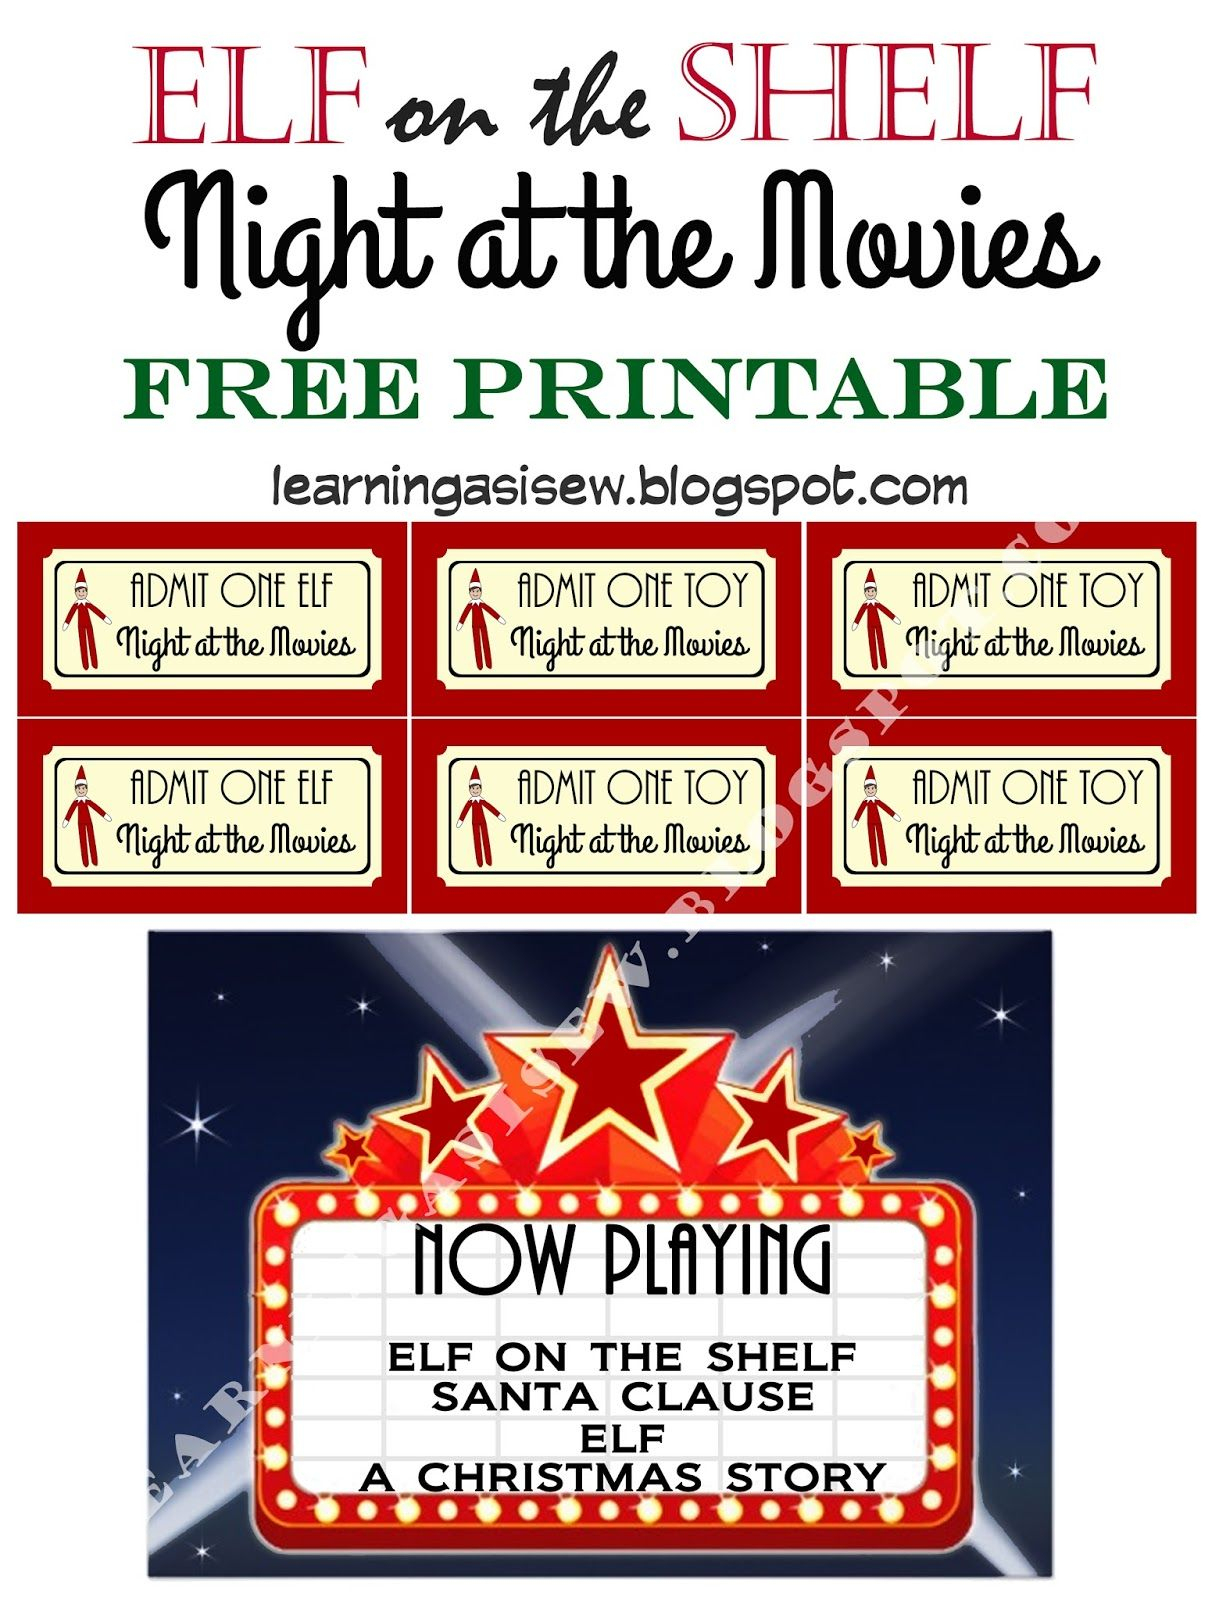 Elf On The Shelf Free Printable - Night At The Movies, Printable - Free Printable Movie Tickets